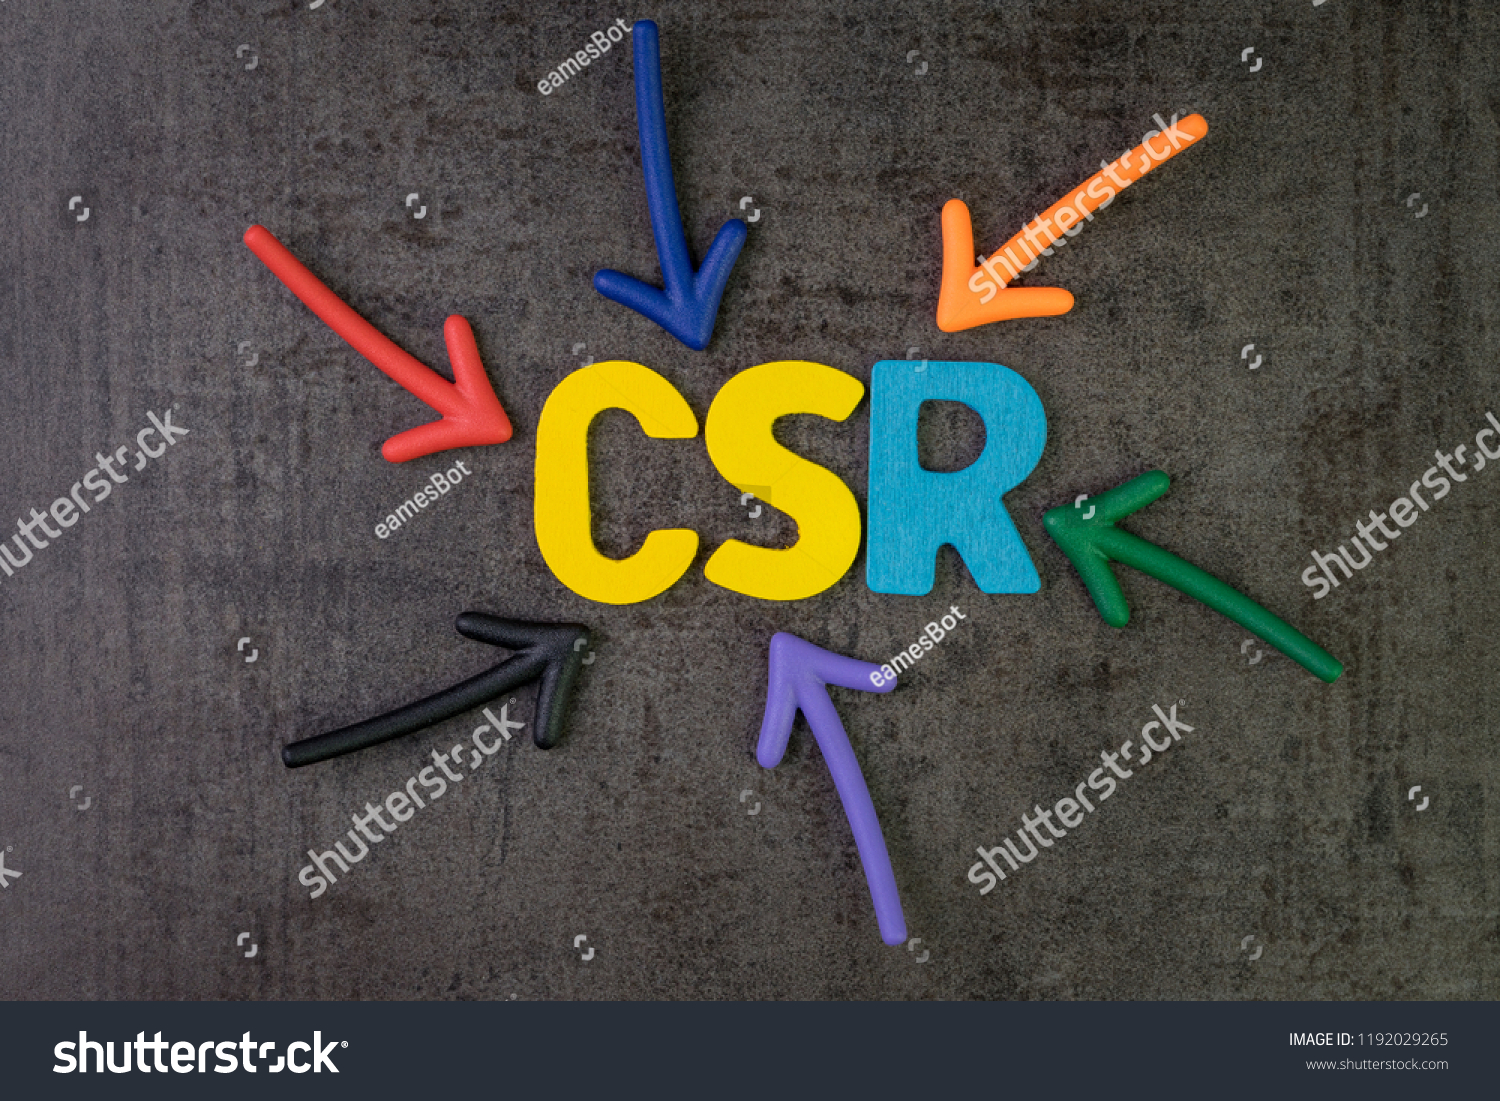 CSR, Corporate social responsibility concept, multi color arrows pointing to the abbreviation CSR at the center of black cement chalkboard wall, the activity to return profit back to people. #1192029265